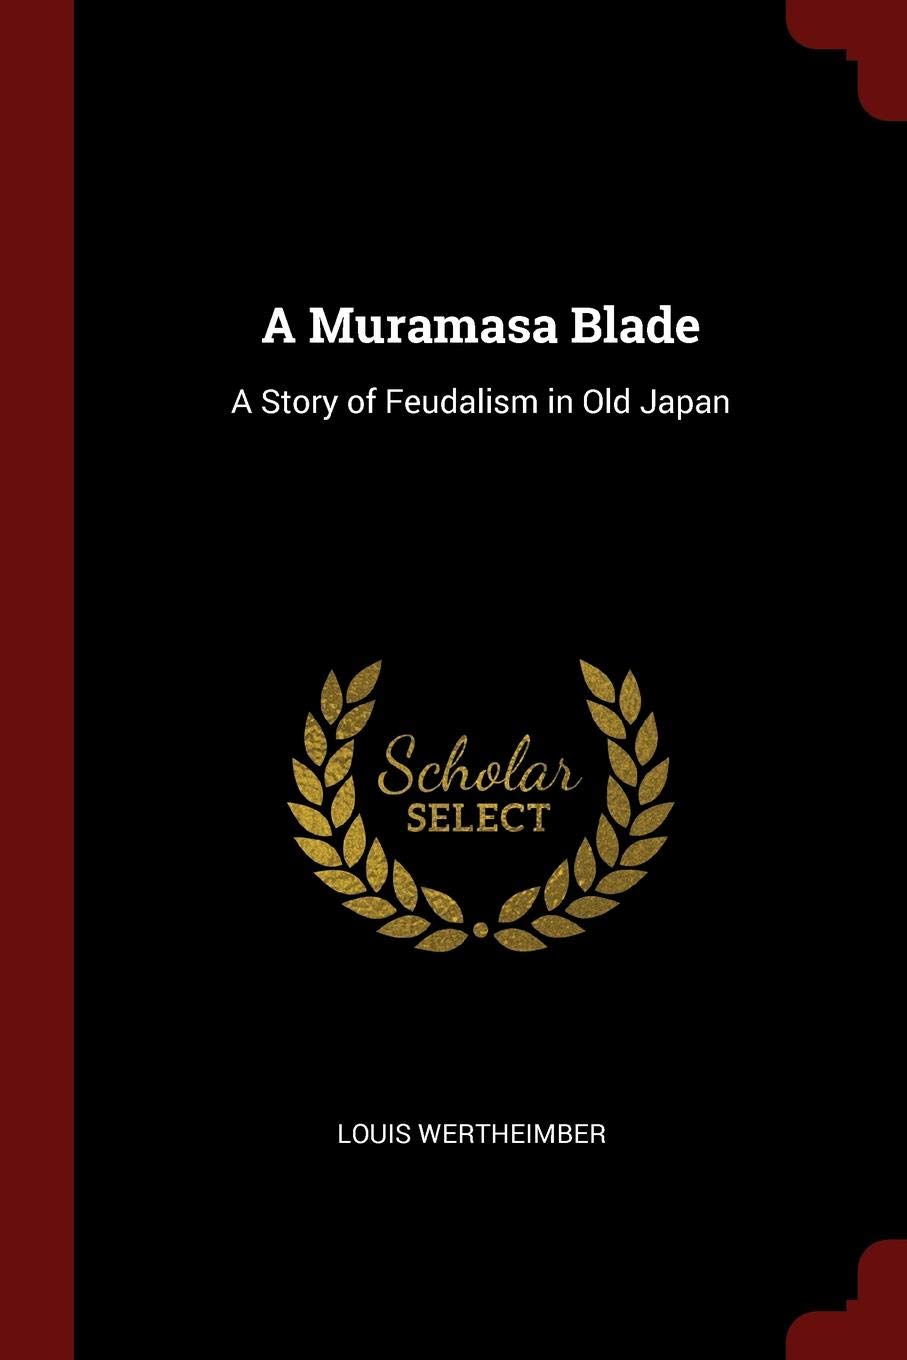 A Muramasa Blade: A Story of Feudalism in Old Japan